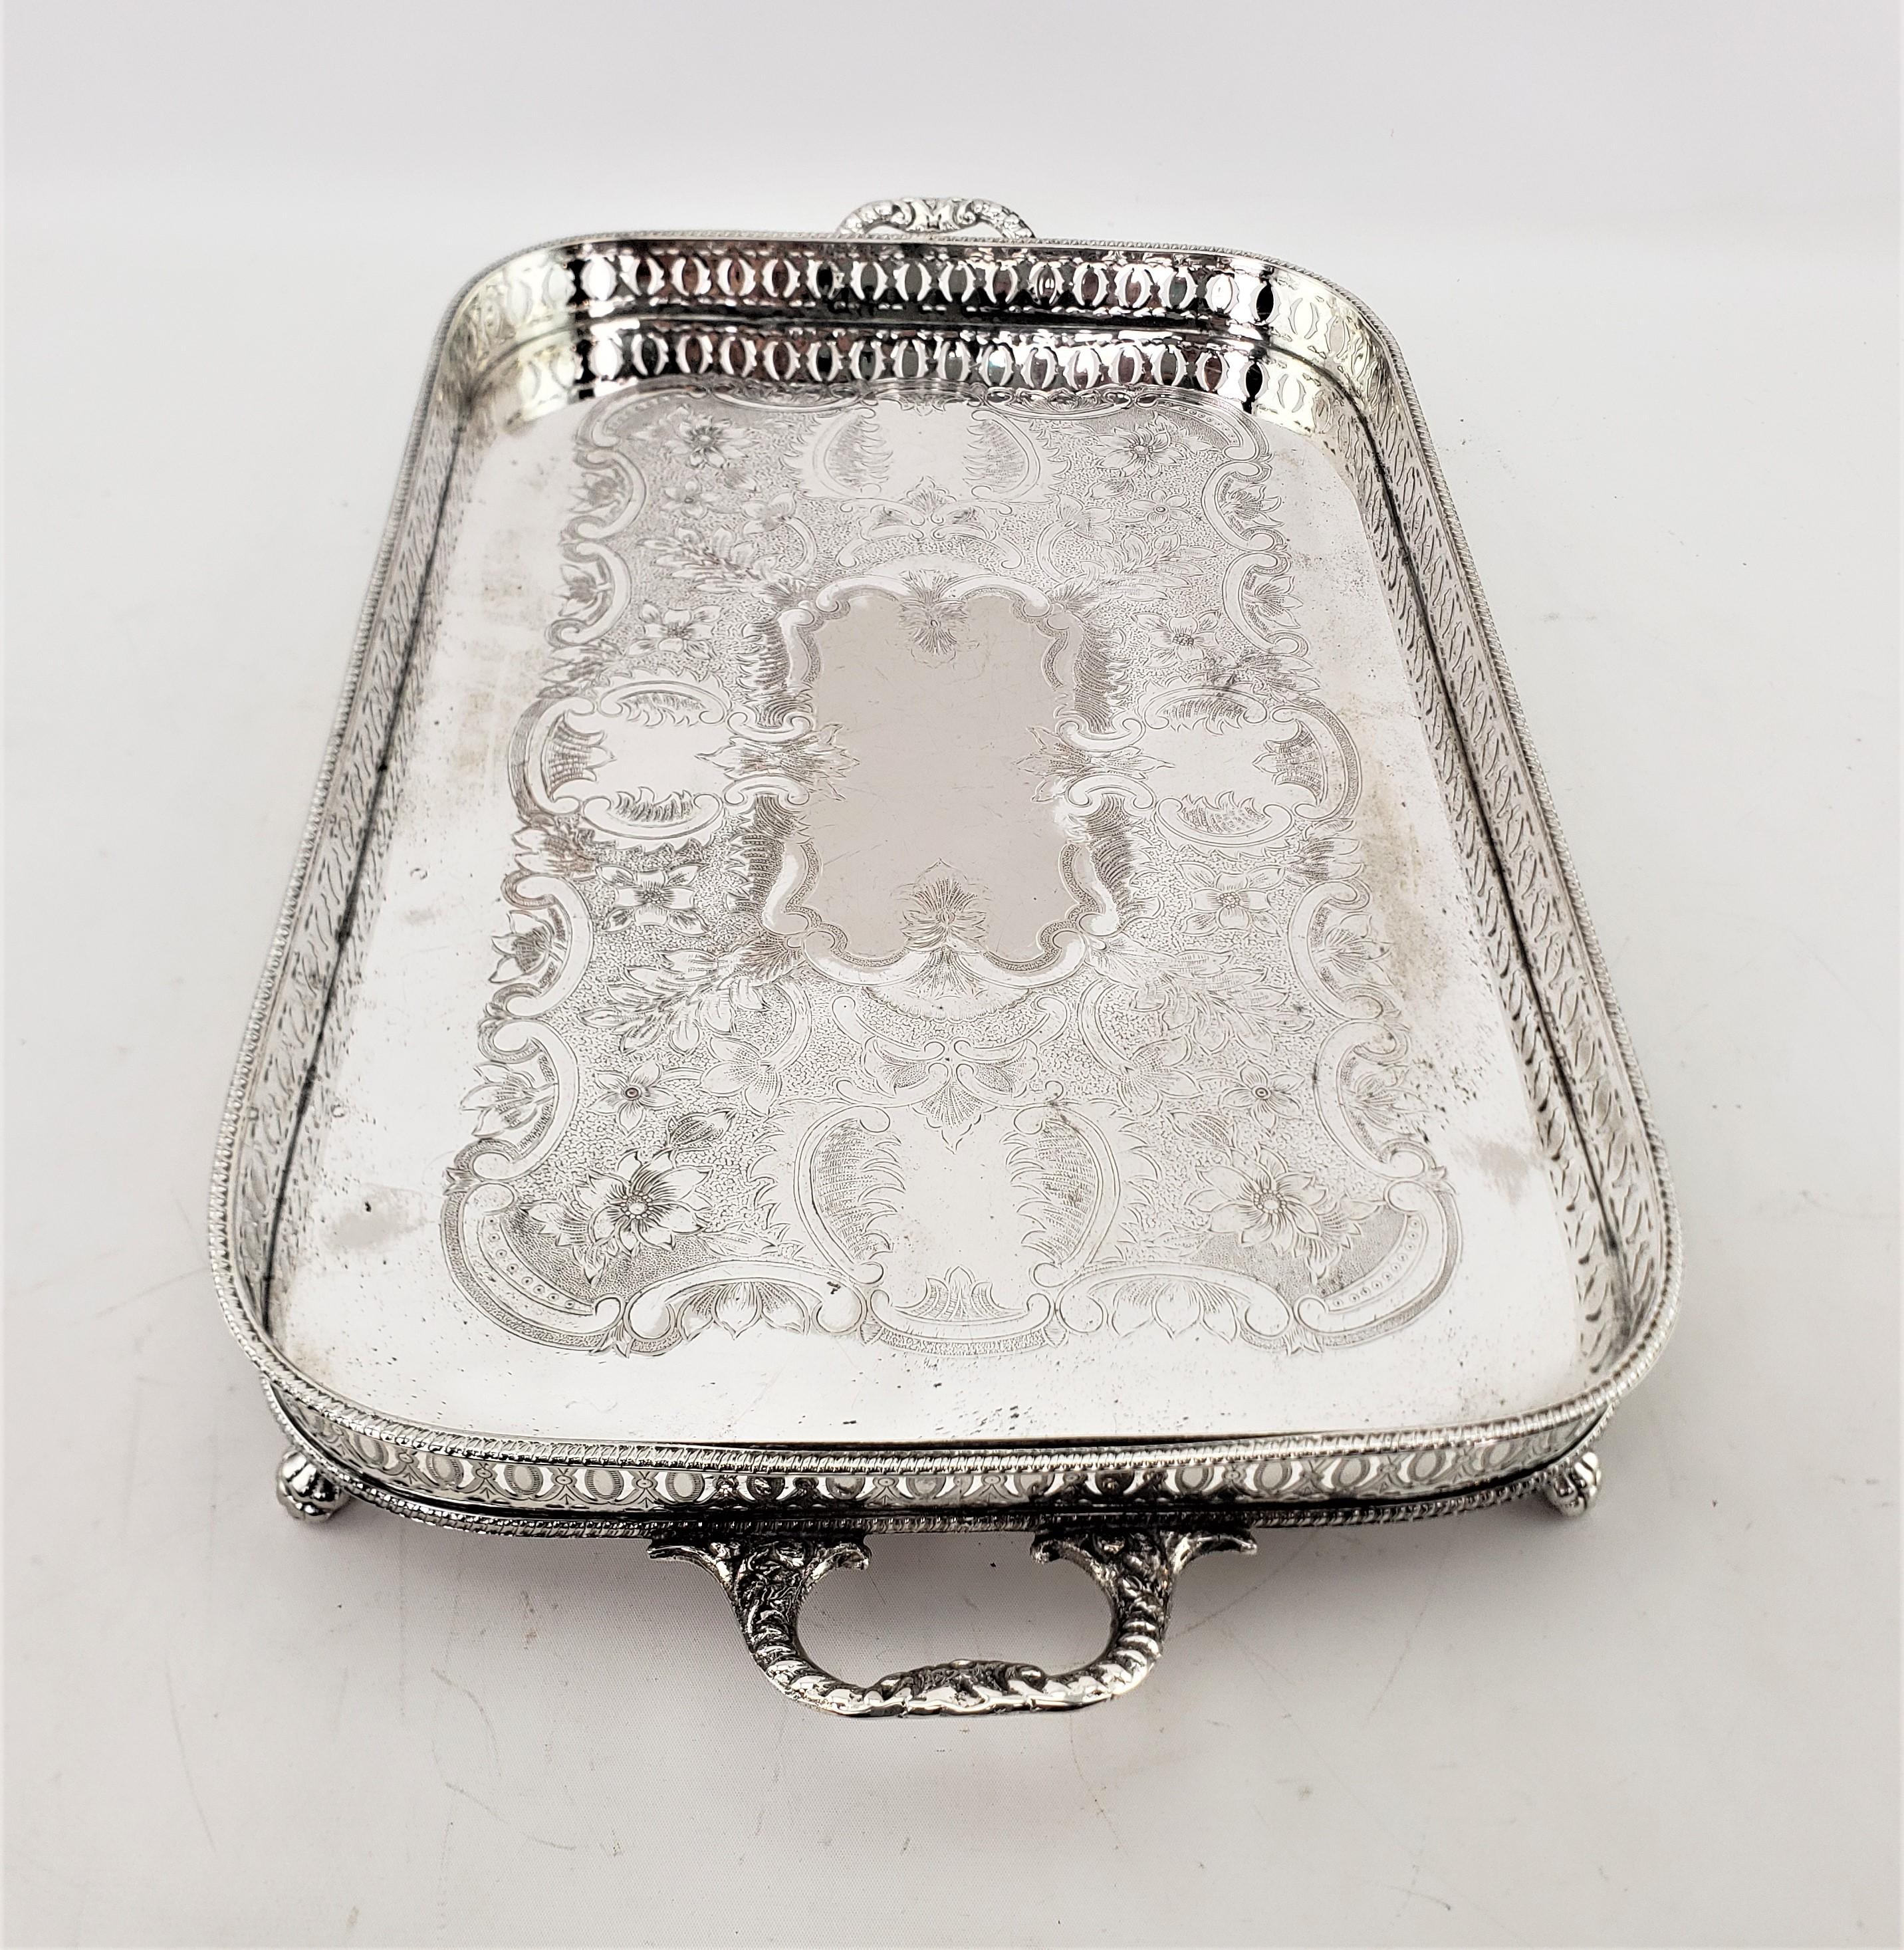 20th Century Antique English Silver Plated Footed Gallery Serving Tray with Floral Engraving